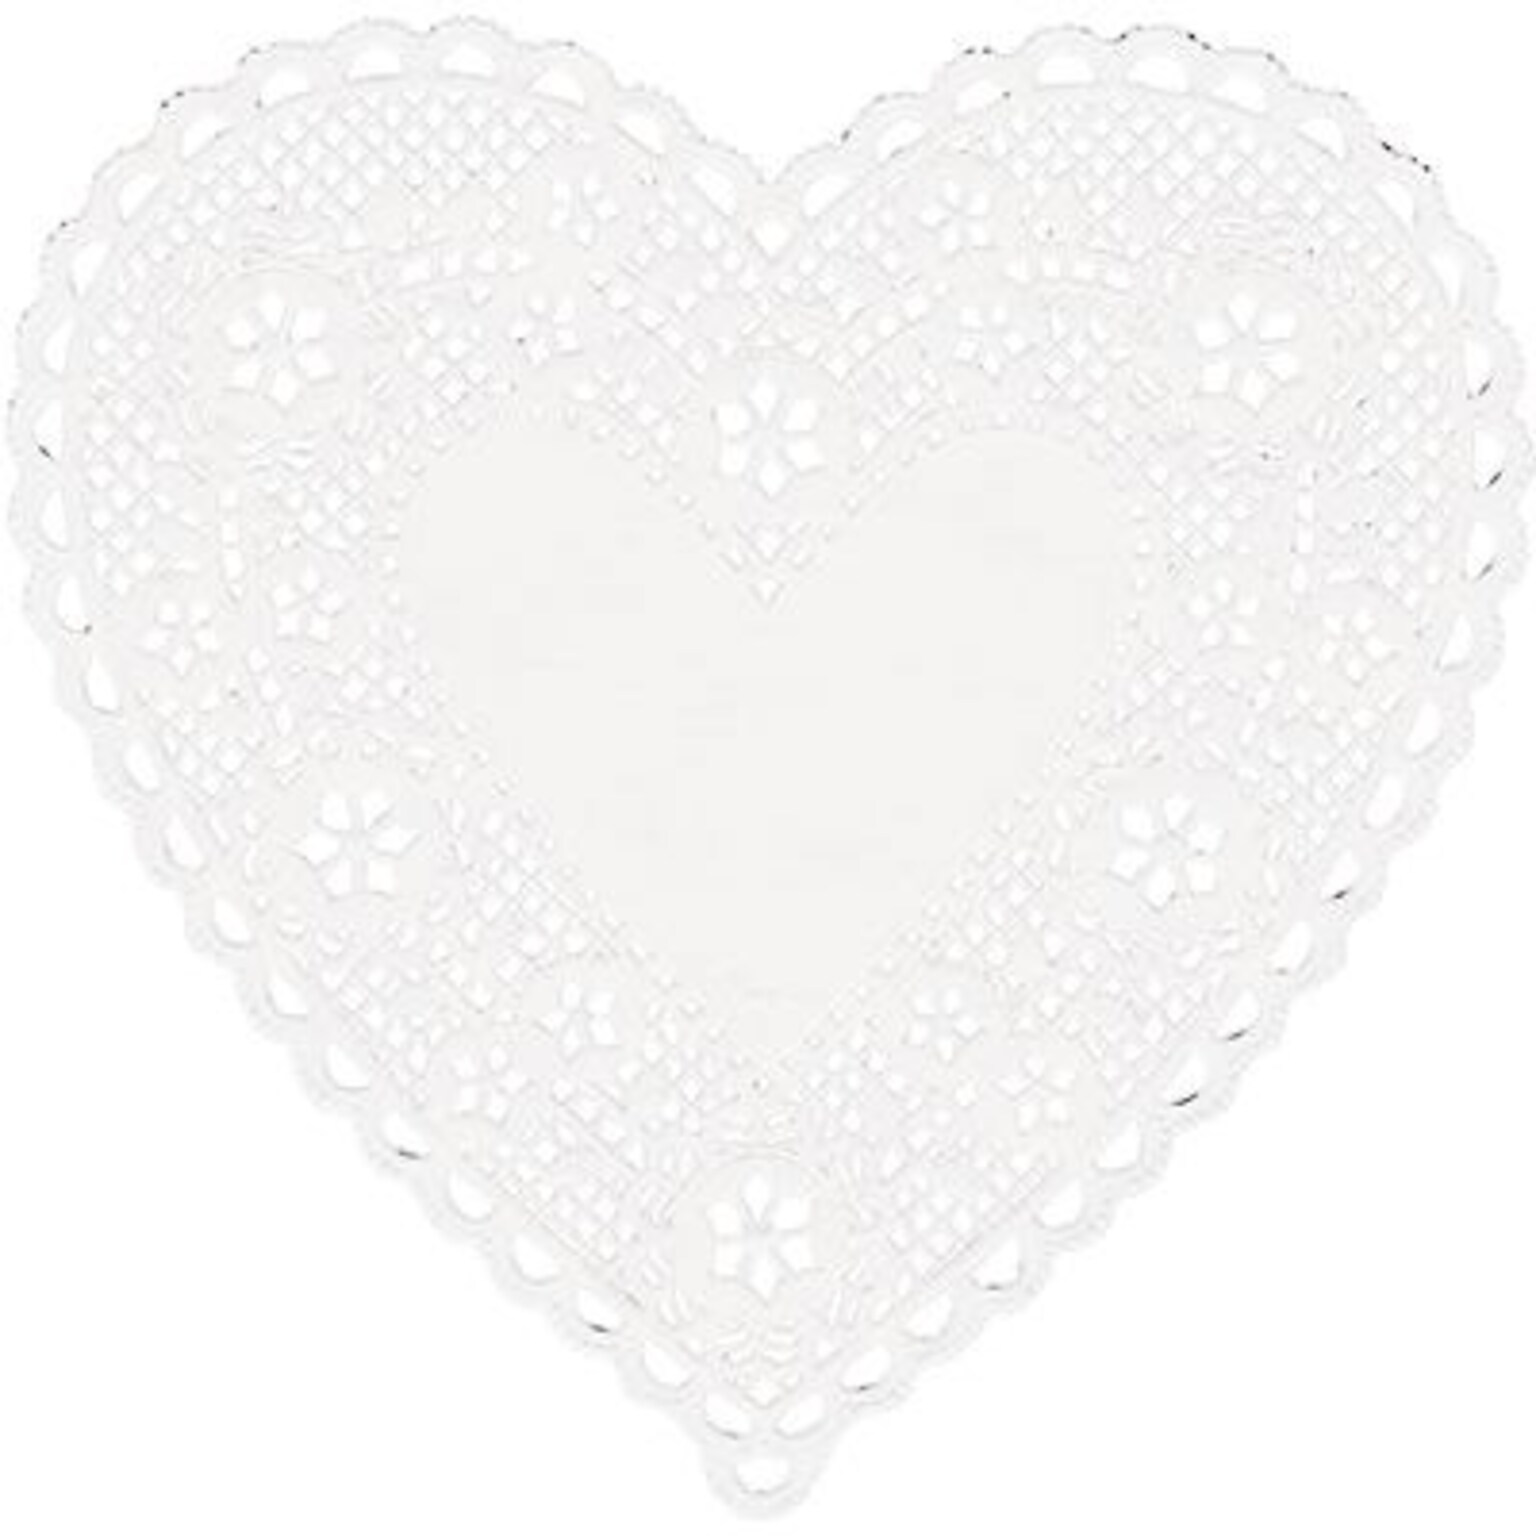 Hygloss Heart Paper Lace Doilies, 4, White (HYG91041)